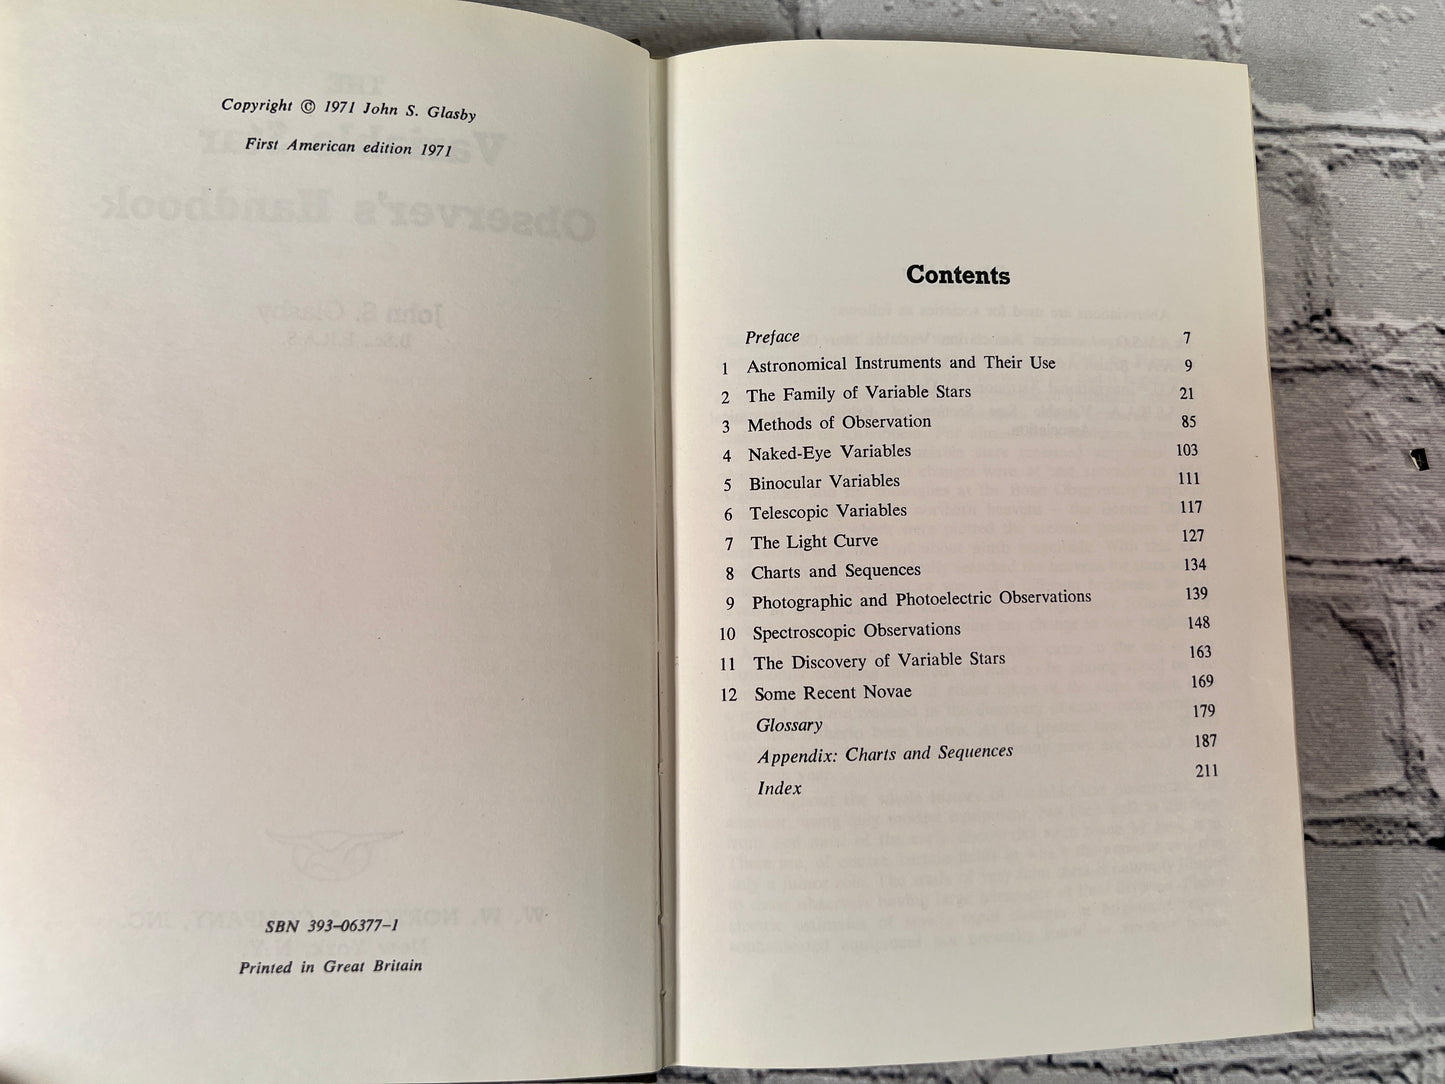 The Variable Star Observer's Handbook by John Glasby [1971 · 1st Edition]